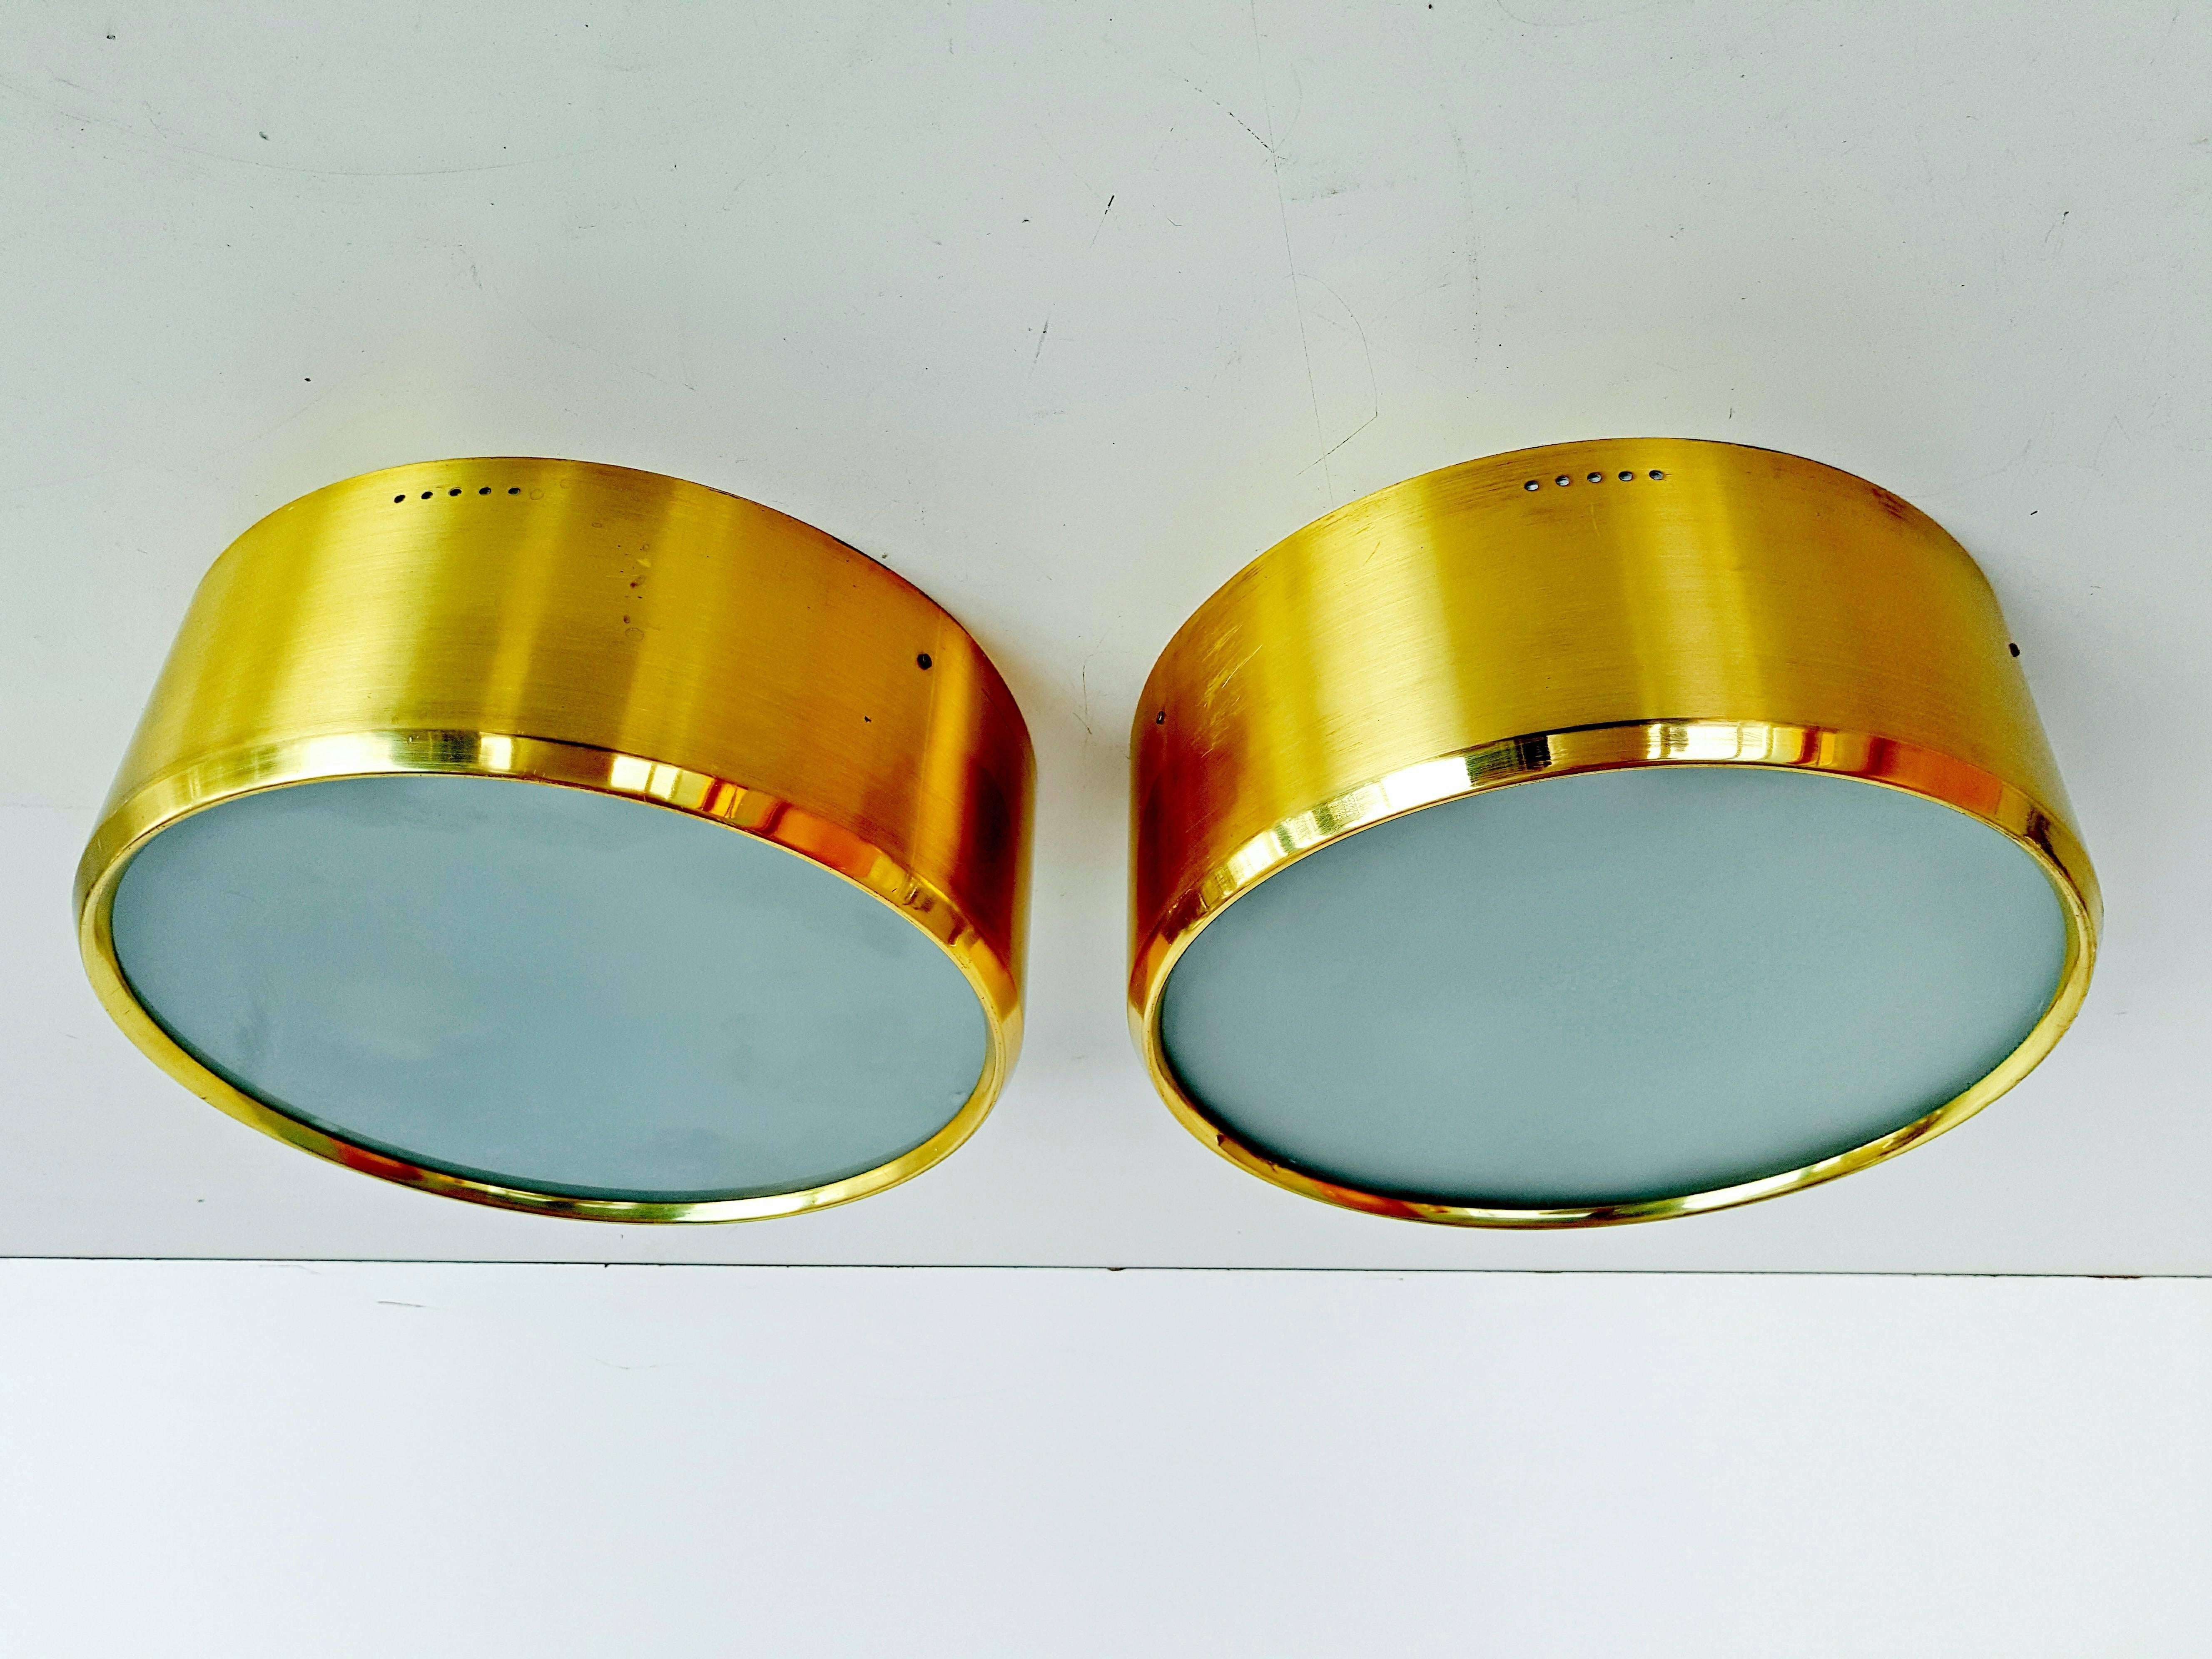 Rare pair of ceiling/wall lights manufactured by Stilnovo in Italy, circa 1960s. Brass, painted aluminum and textured glass. Two bulbs per sconce.